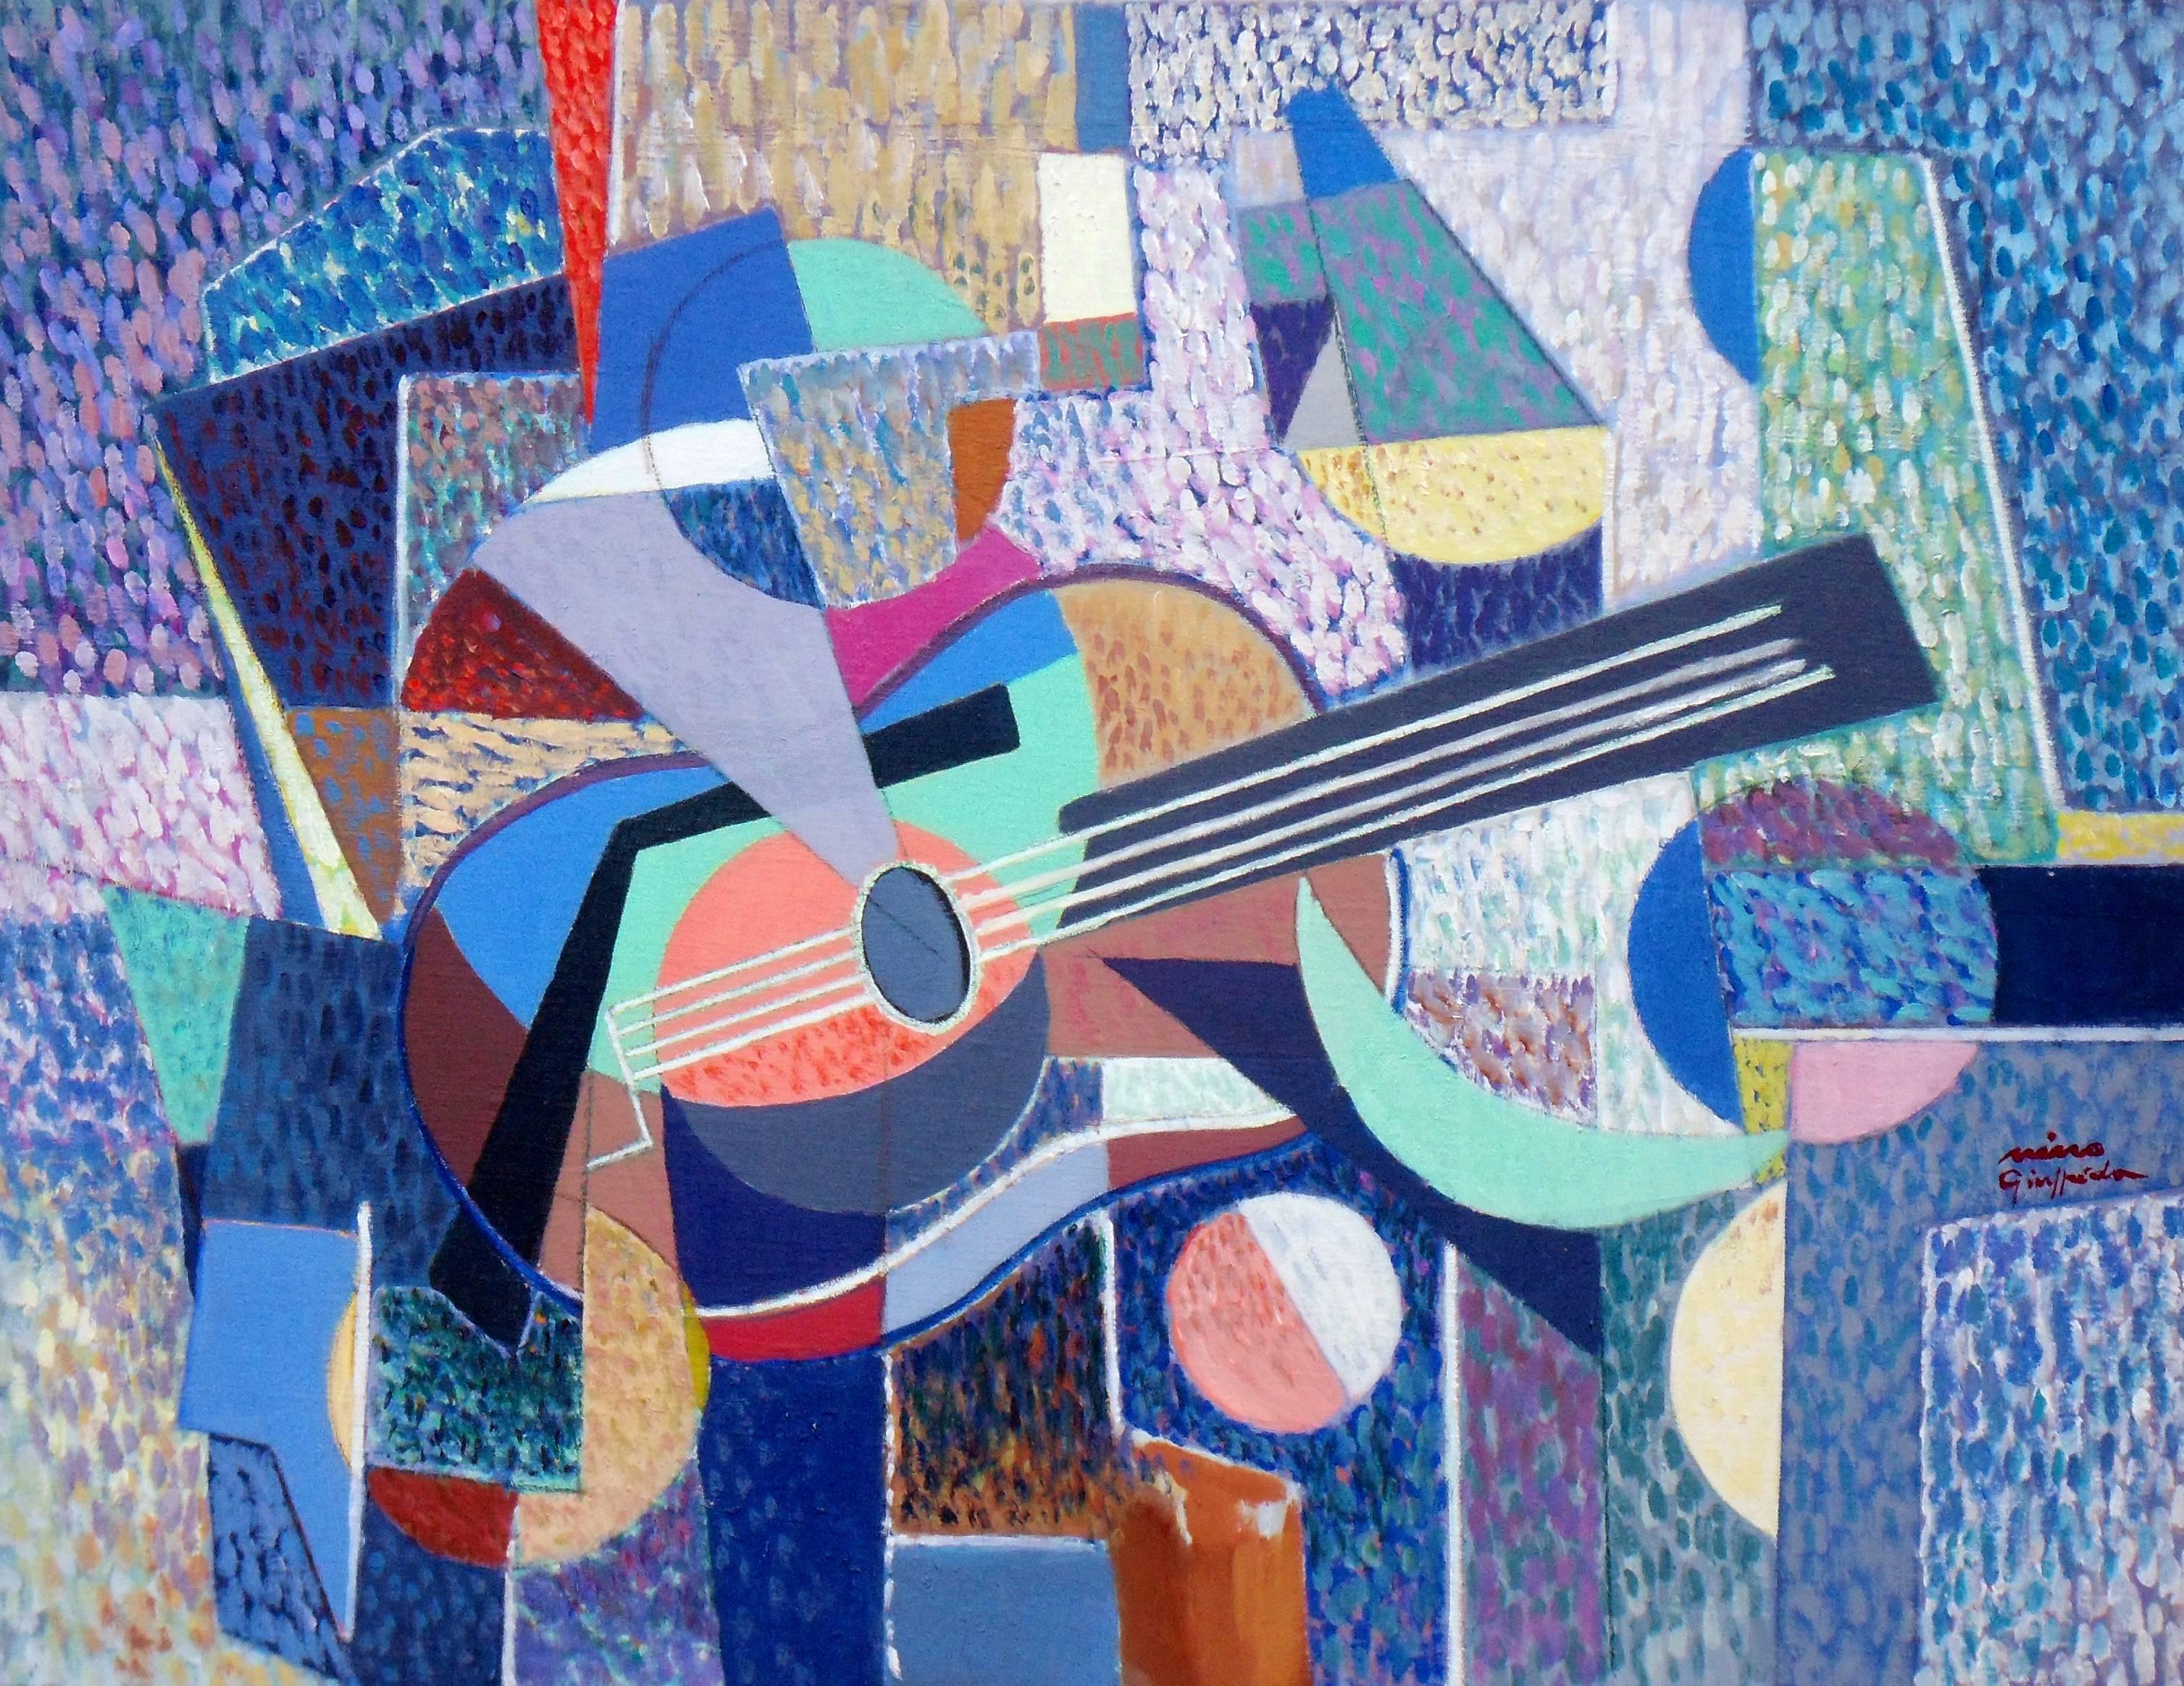 Vibration's Guitare - Cubist Painting by Nino Giuffrida